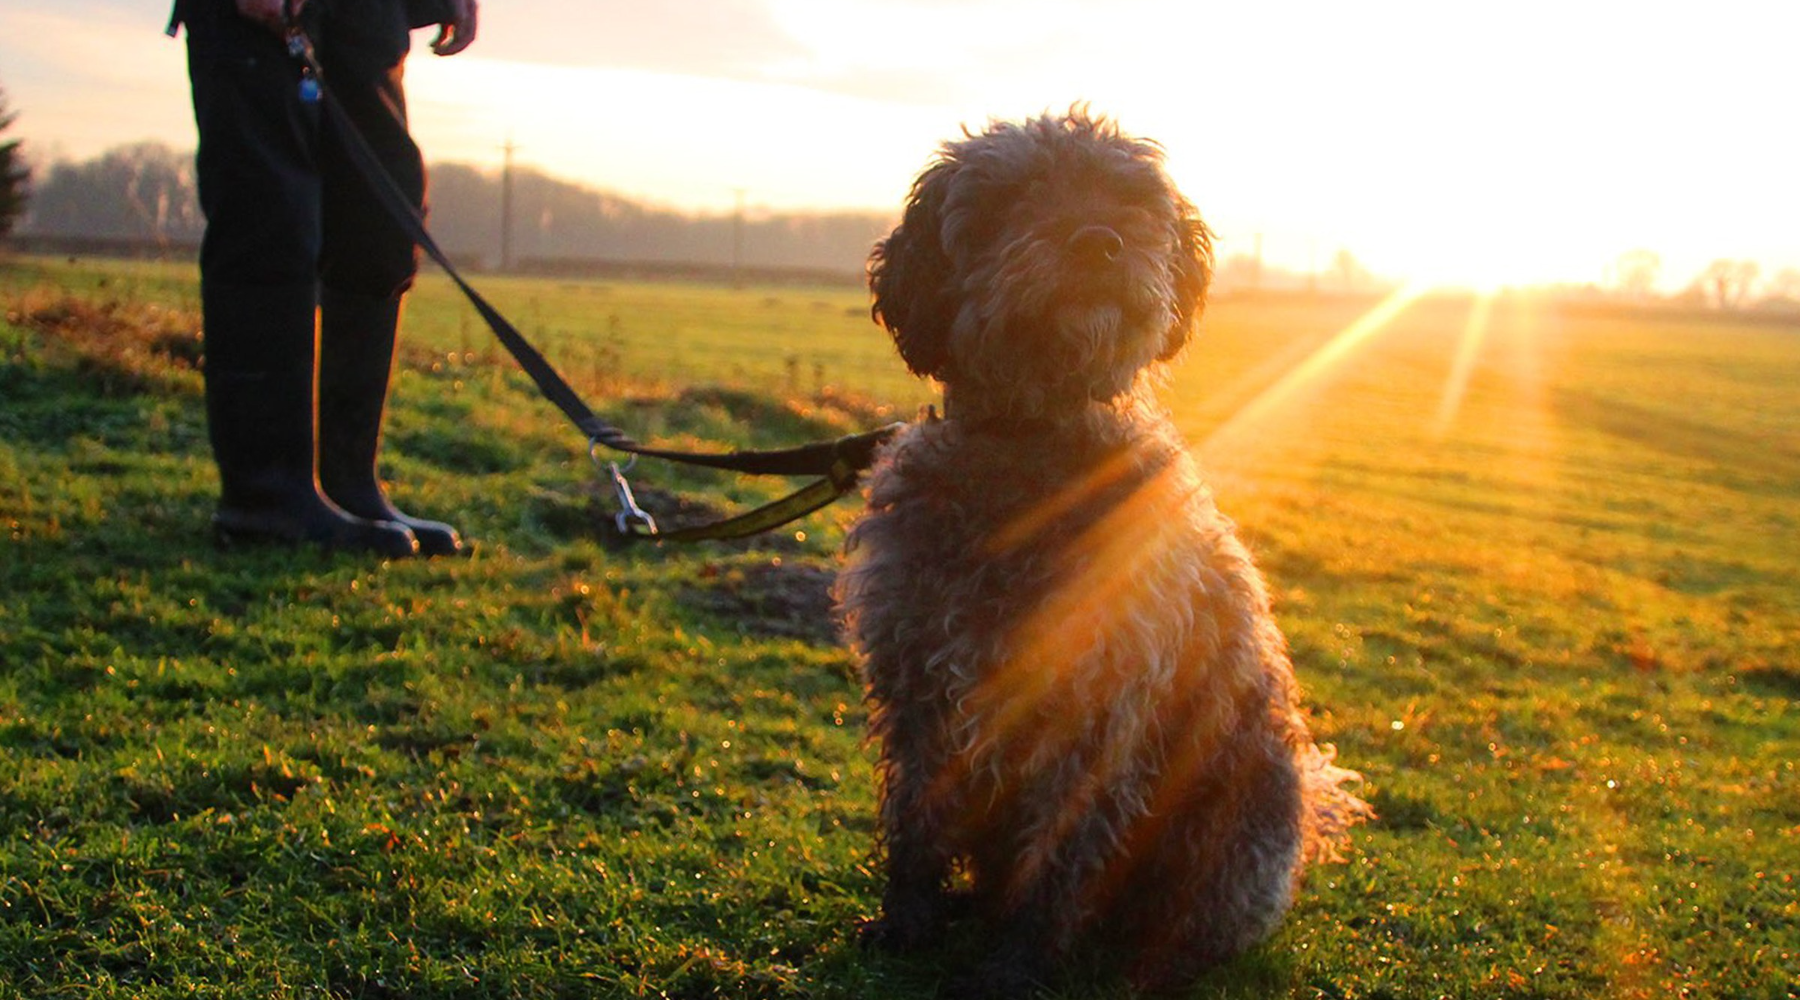 Omaze Million Pound House Lake District - A Dog in a field backlit by the sun 